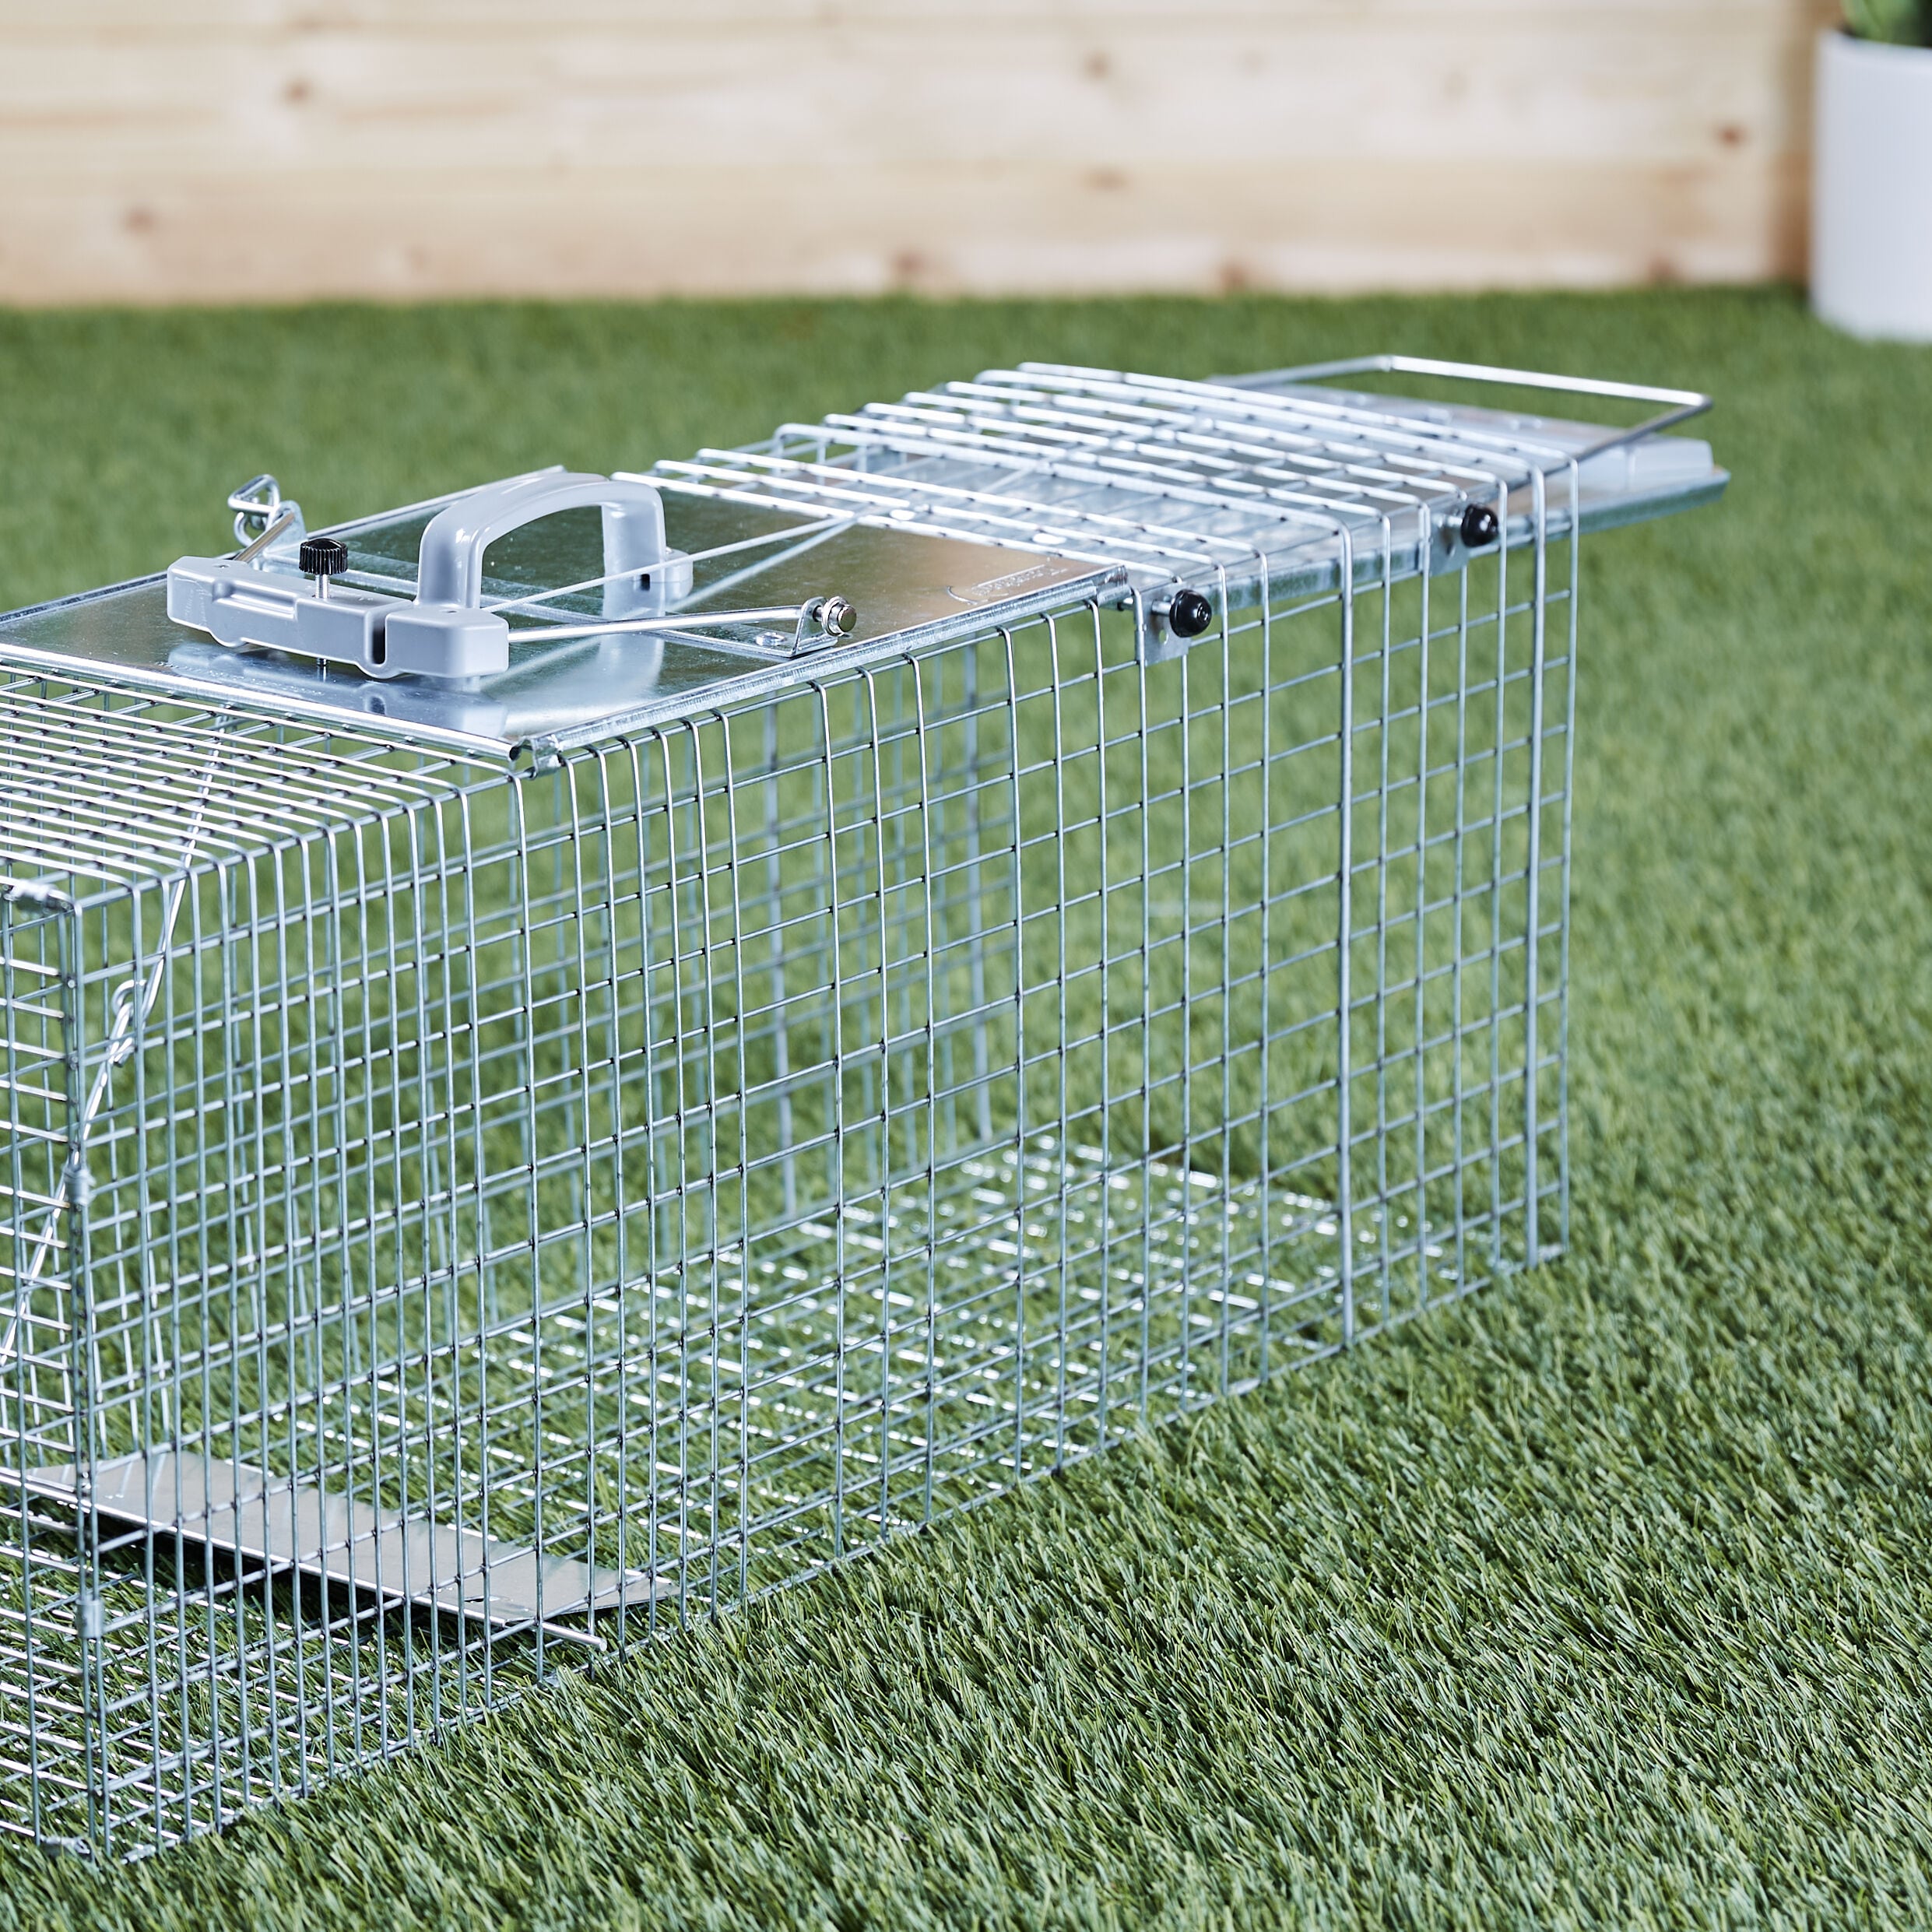 HAVAHART LIVE ANIMAL CAGE TRAP IN BOX - Earl's Auction Company